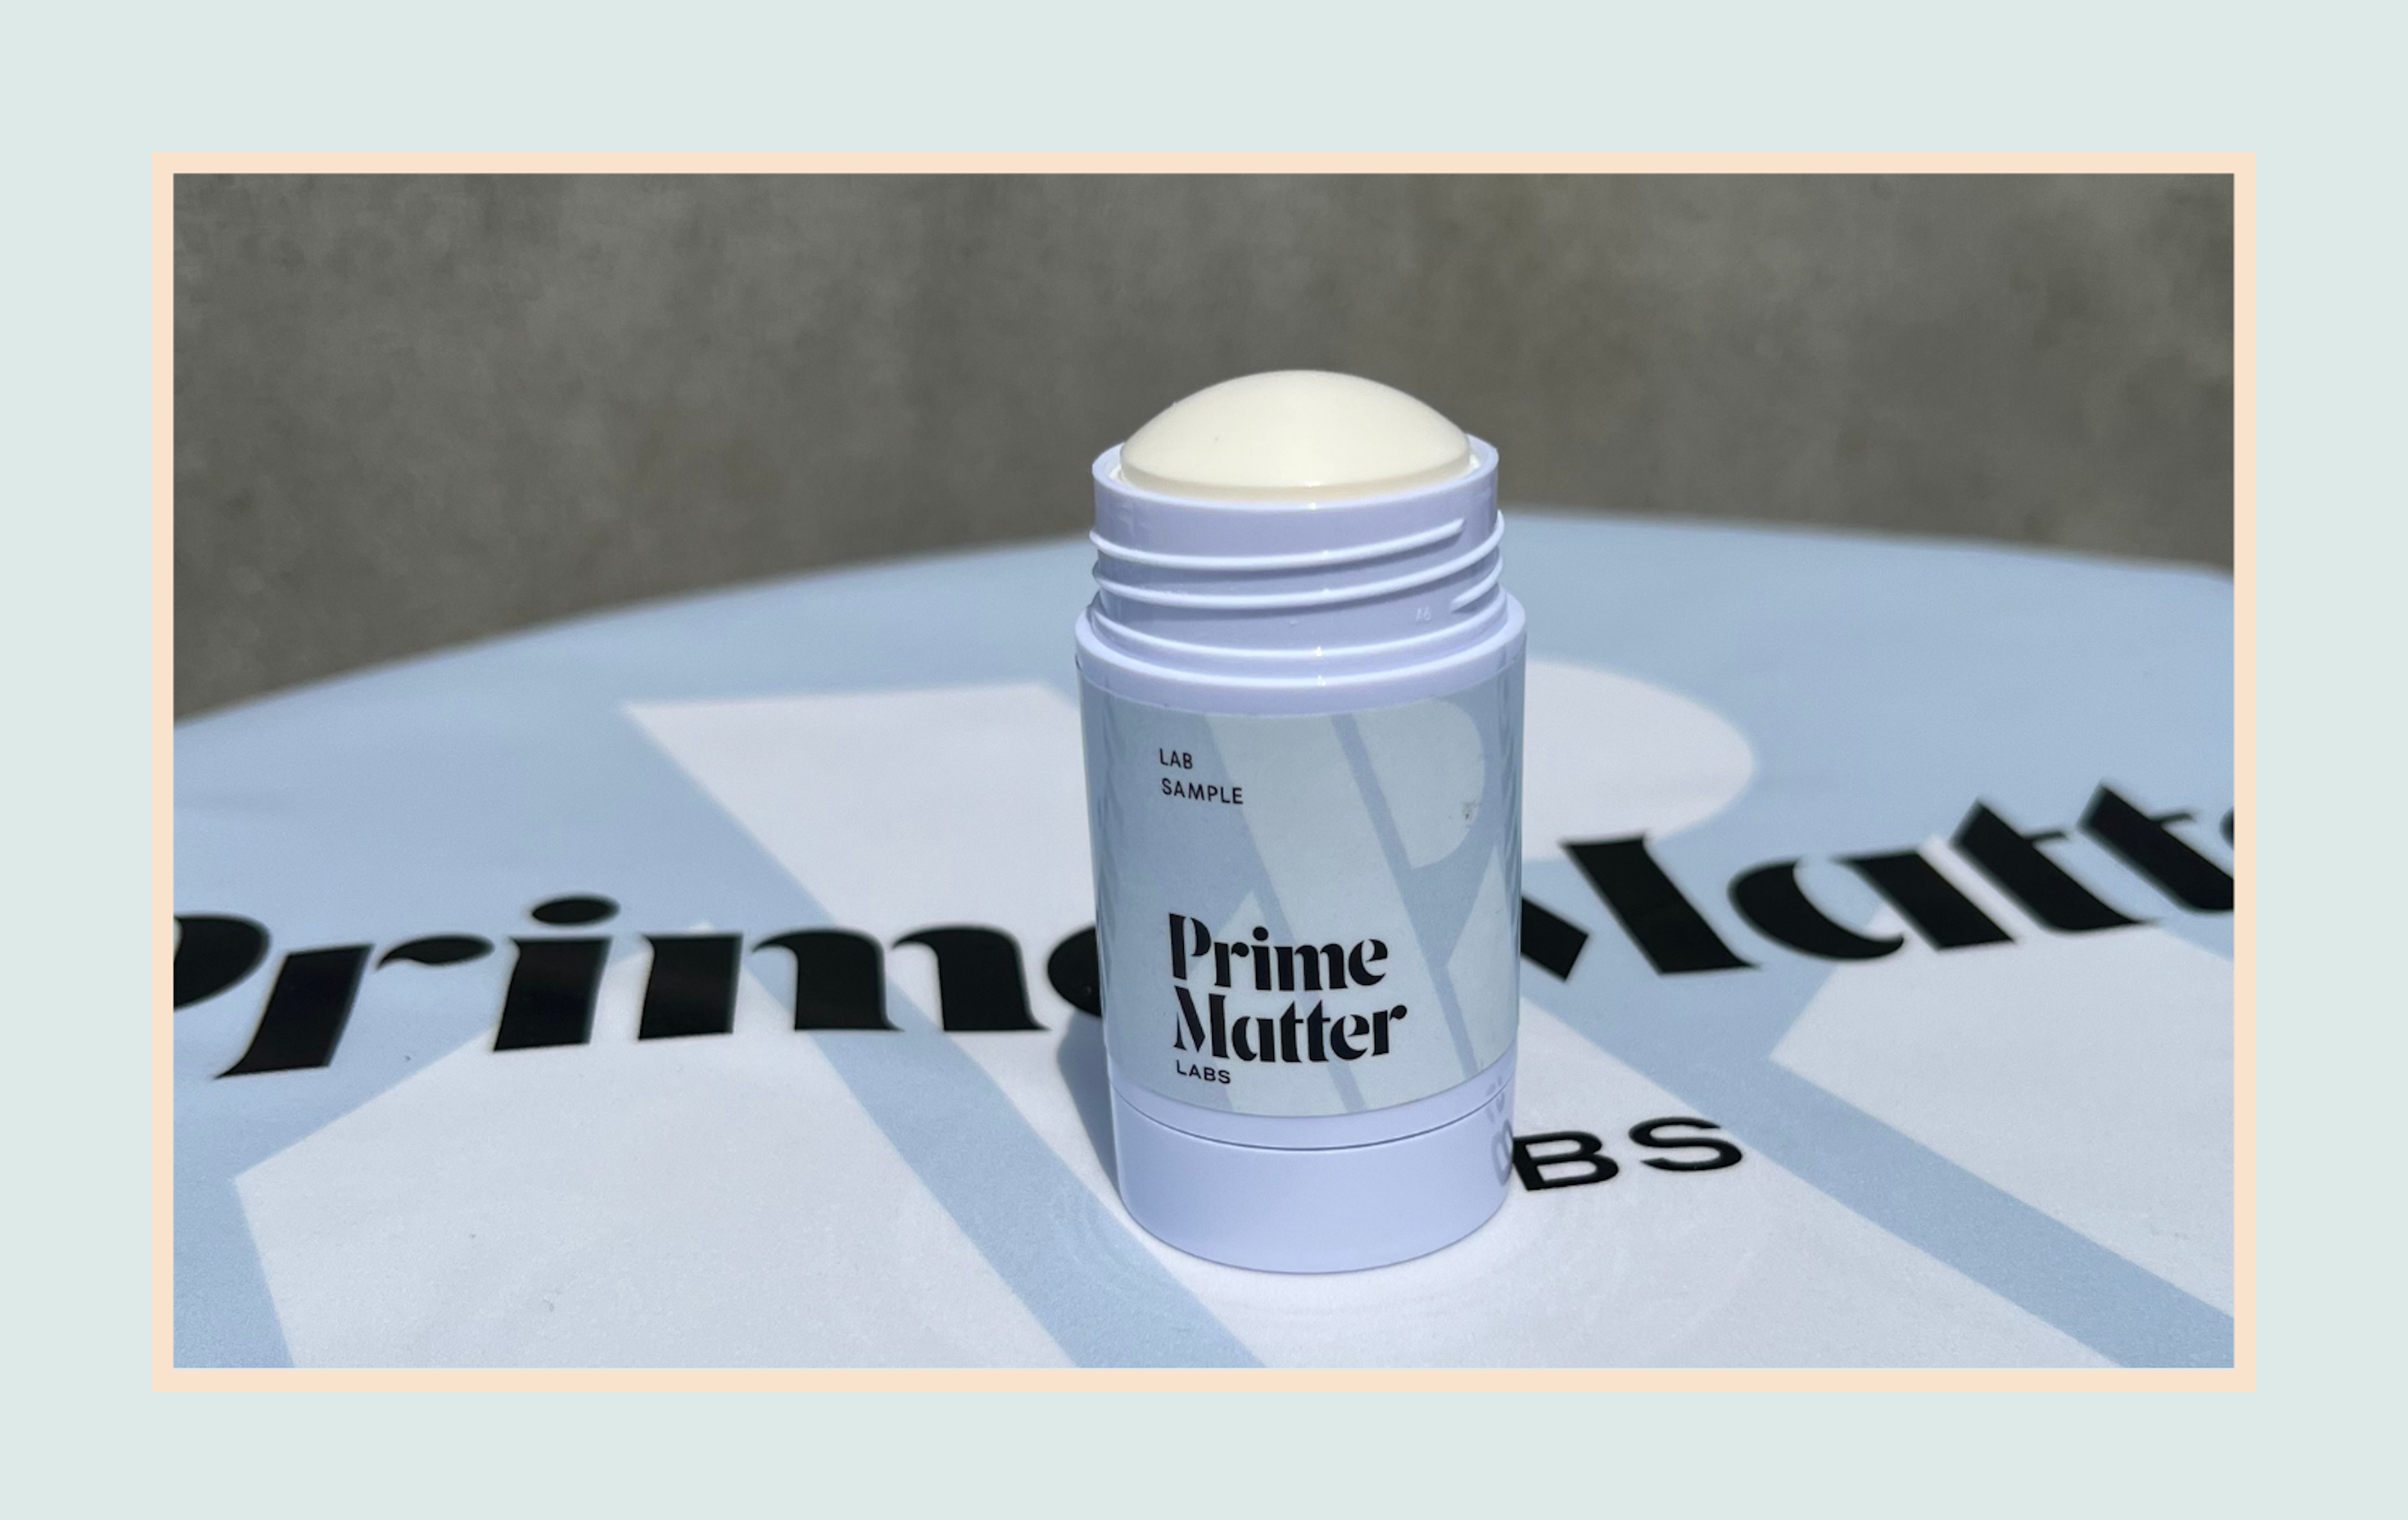 Photo of SPF Sticks with Prime Matter Labs logo